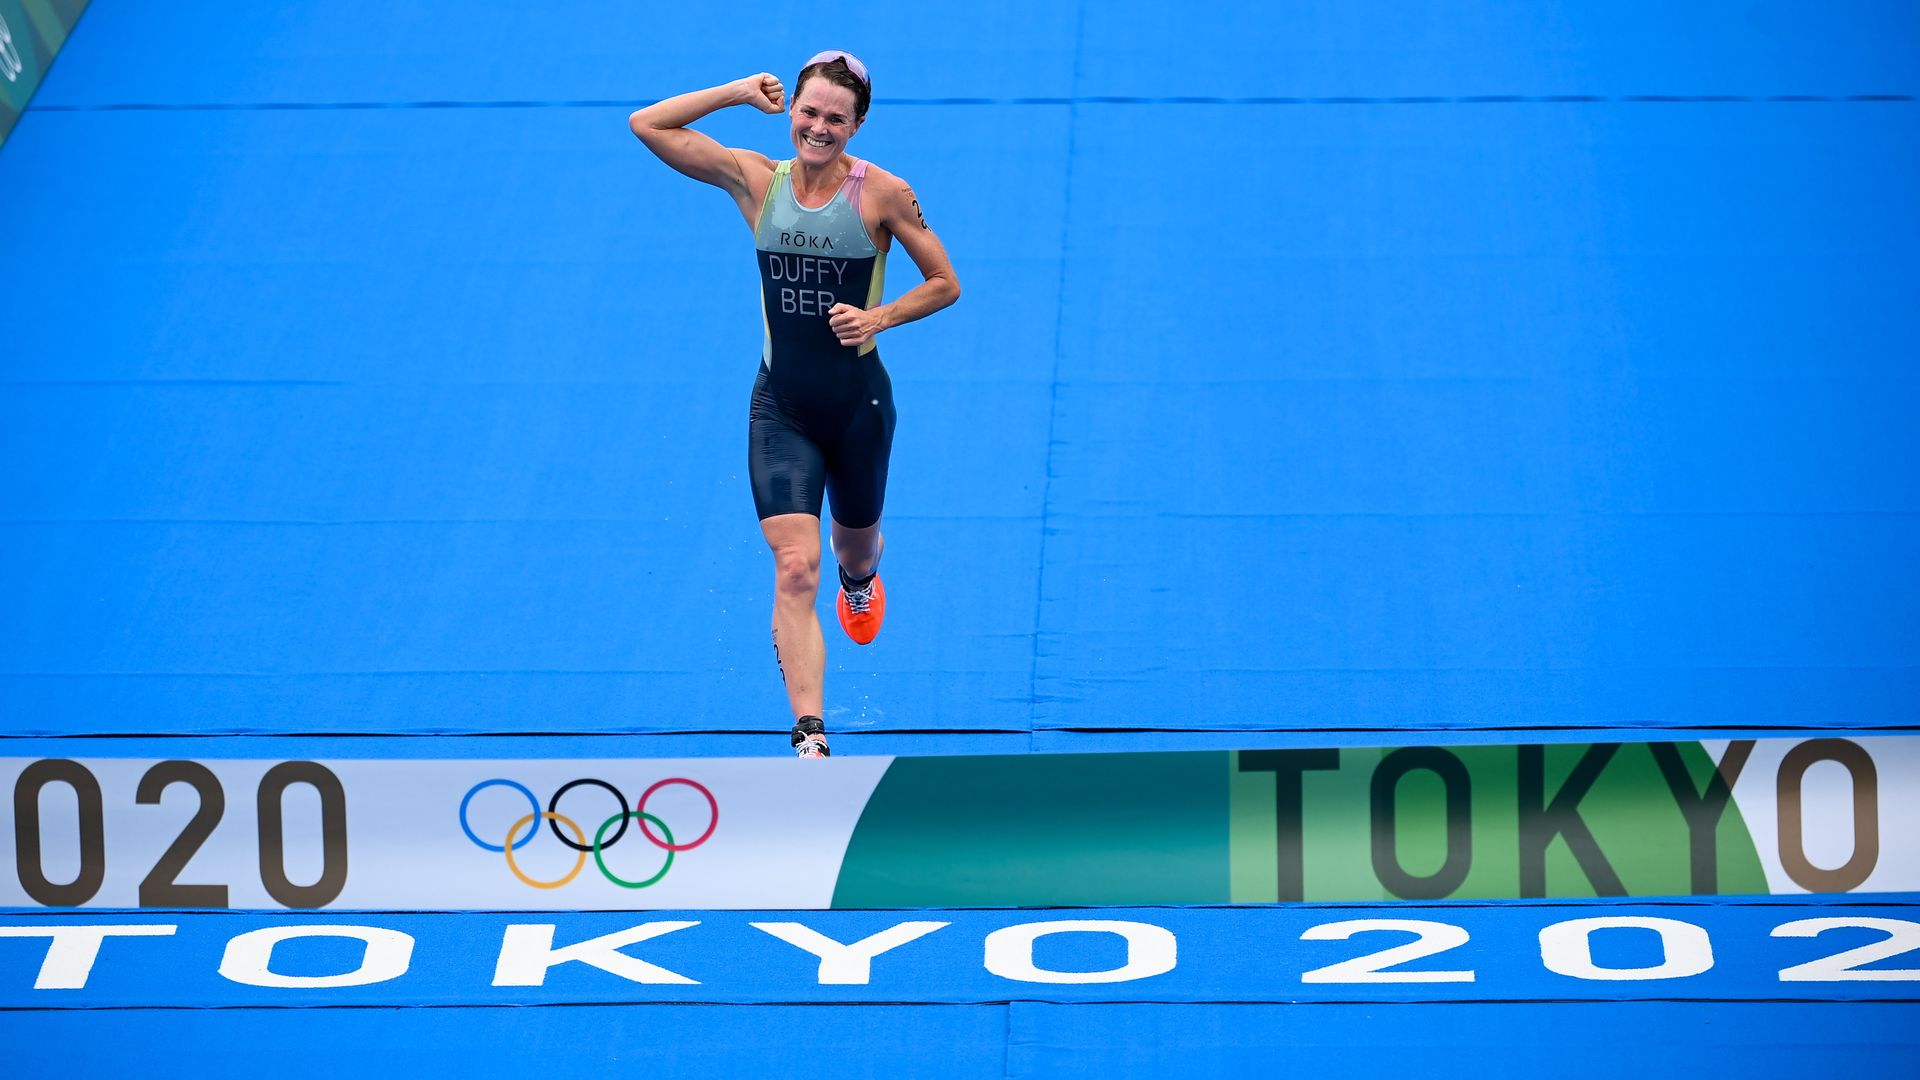 Flora Duffy of Bermuda on her way to winning the Women's Triathlon at the Odaiba Marine Park during the 2020 Tokyo Summer Olympic Games in Tokyo, Japan